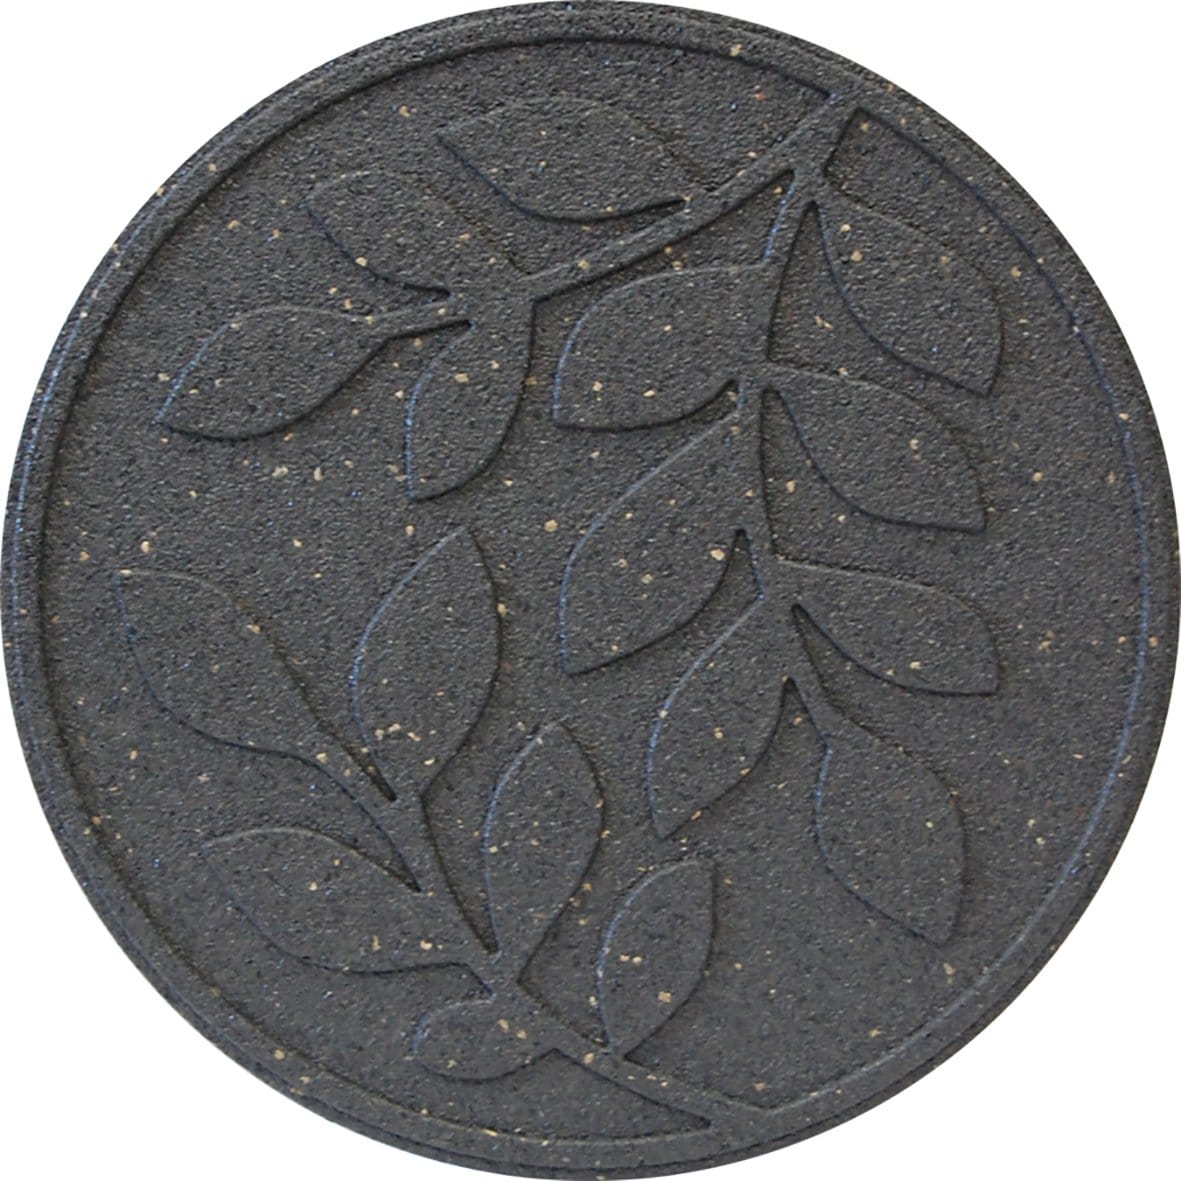 Grey stepping stone with leaf pattern (Pack of 2 save £1) - Safer Surfacing